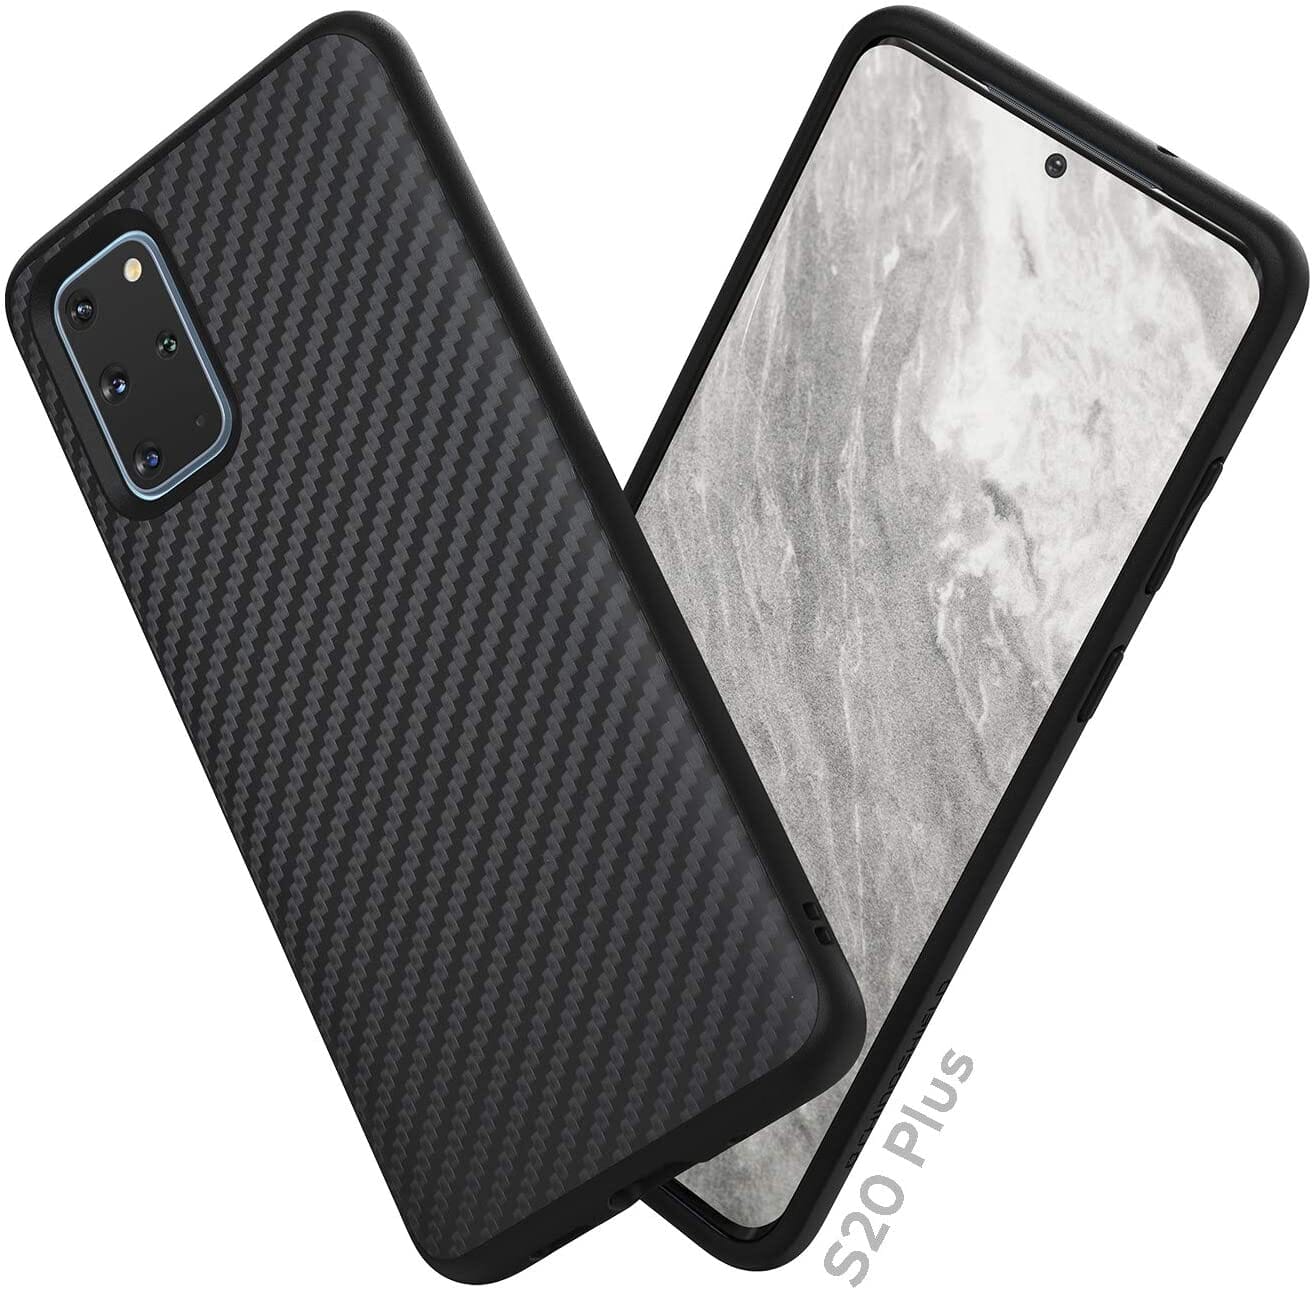 RhinoShield SolidSuit Protective Case with Premium Finish for Samsung Galaxy S20 Series Samsung S20 Series RhinoShield Carbon Fiber Samsung Galaxy S20 Plus 